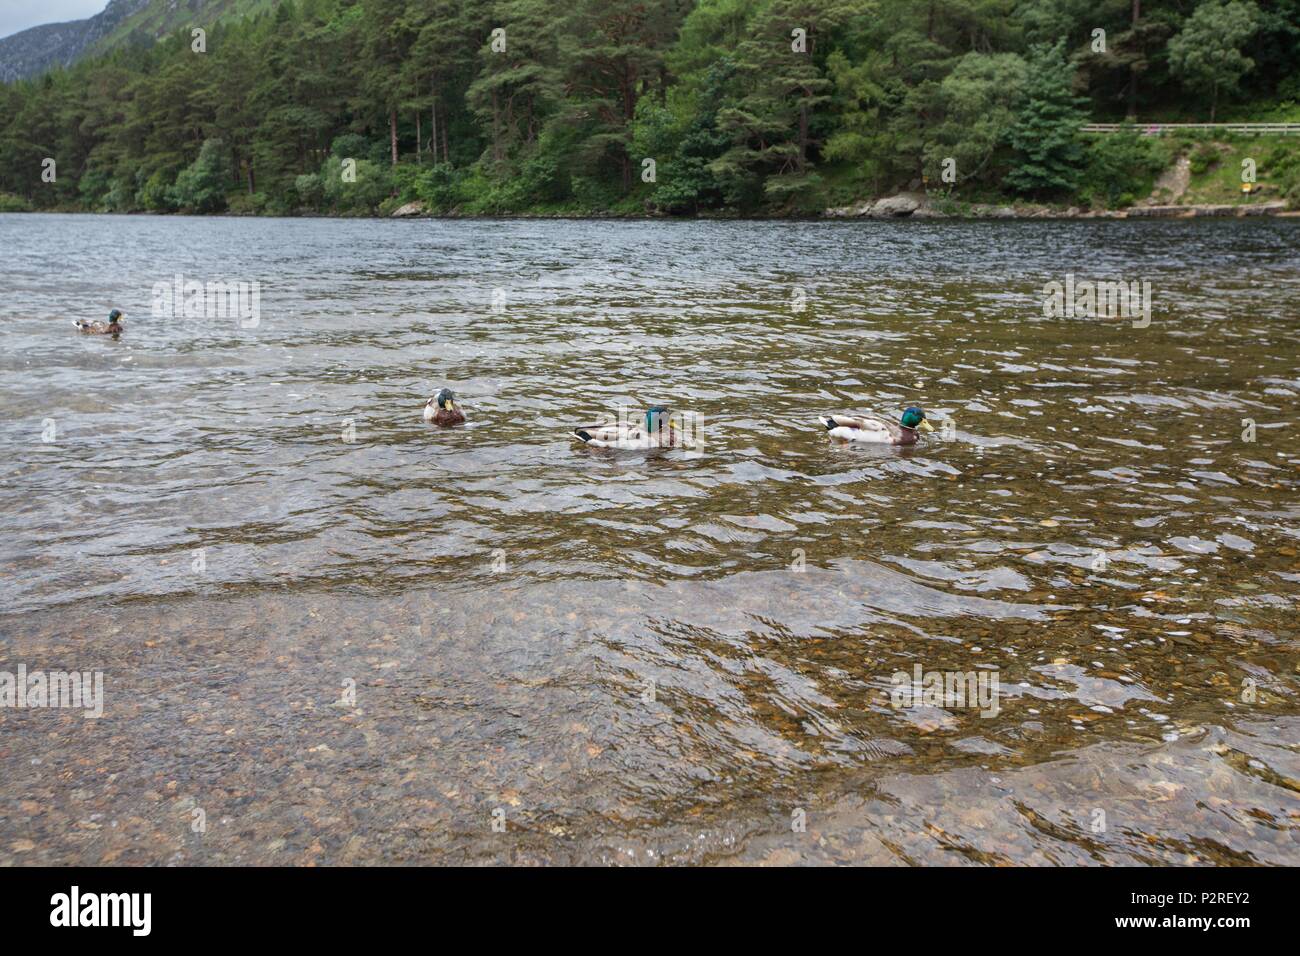 June 15, 2018 - Wicklow, Ireland - View of Glendalough Park in Wicklow, Ireland. The site housed a religious complex, built in the 8th century, which was attacked and destroyed by the Vikings and British. (Credit Image: © Paulo Lopes via ZUMA Wire) Stock Photo